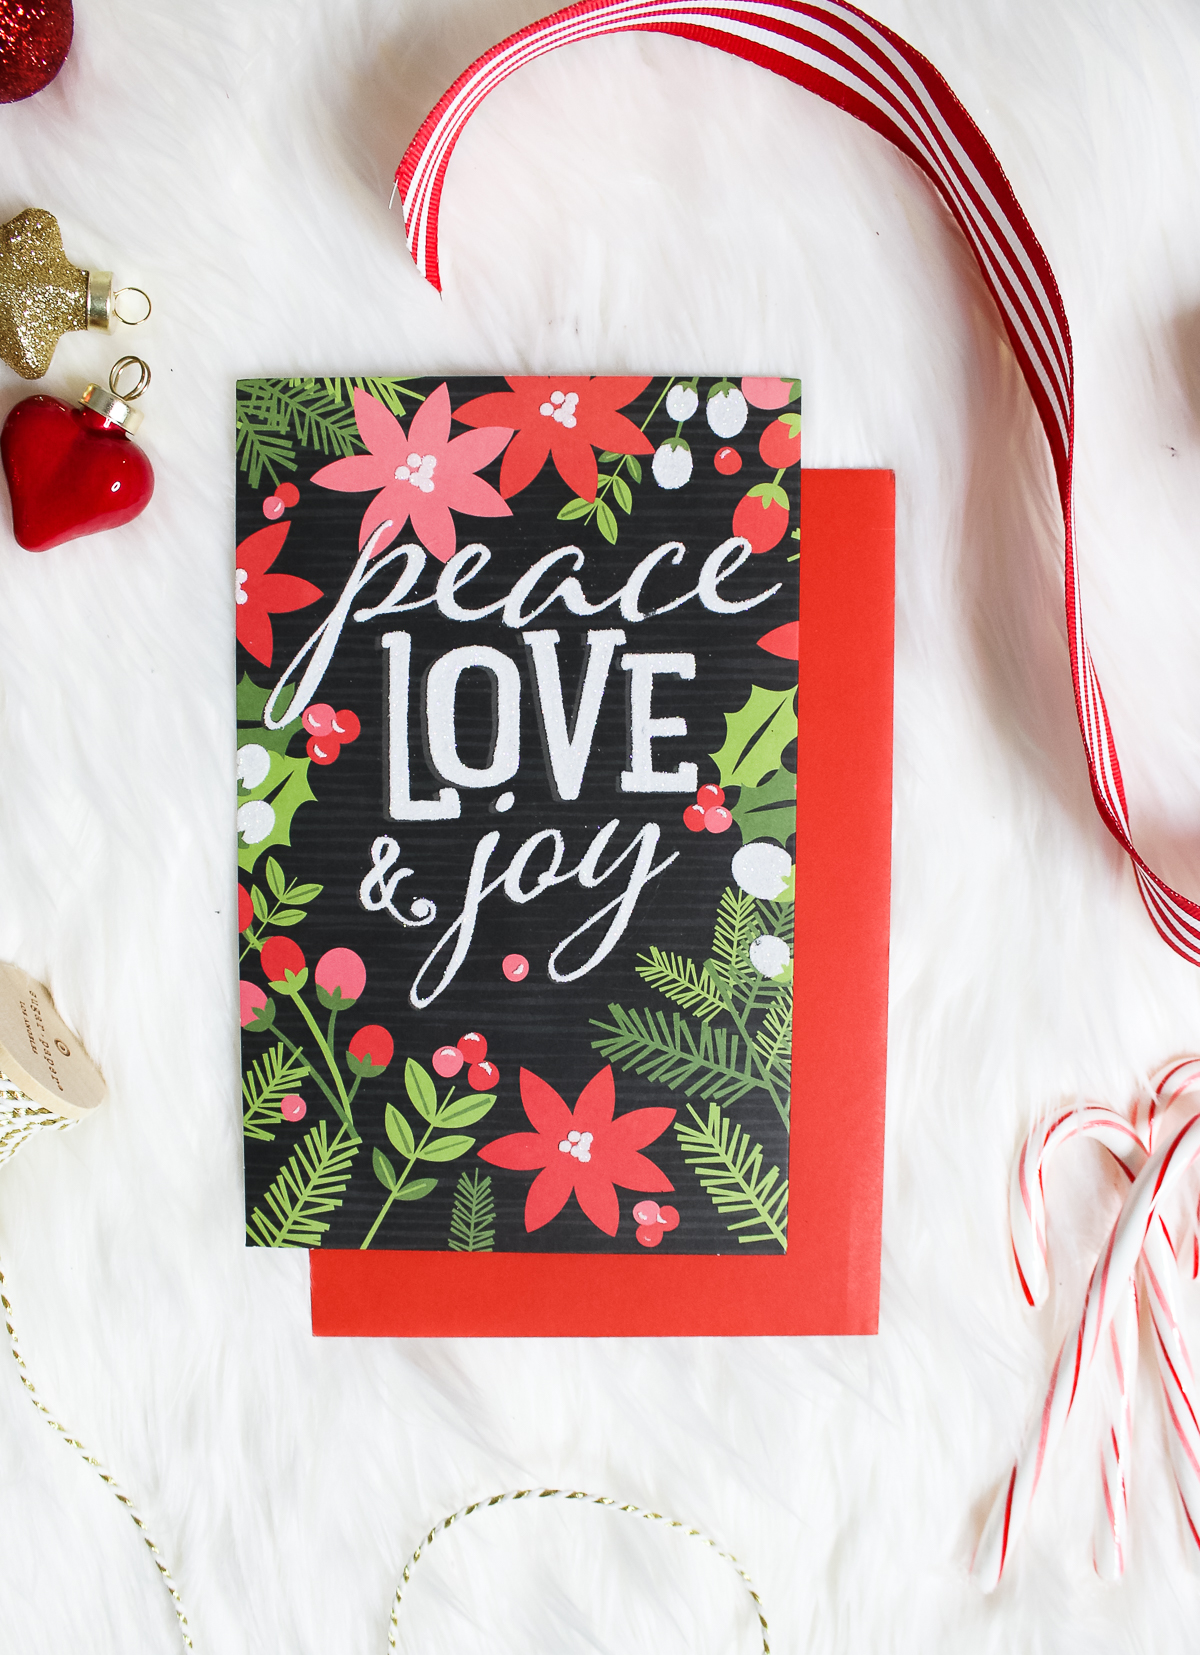 Creative and elegant holiday gift wrap ideas by southern blogger Stephanie Ziajka from Diary of a Debutante